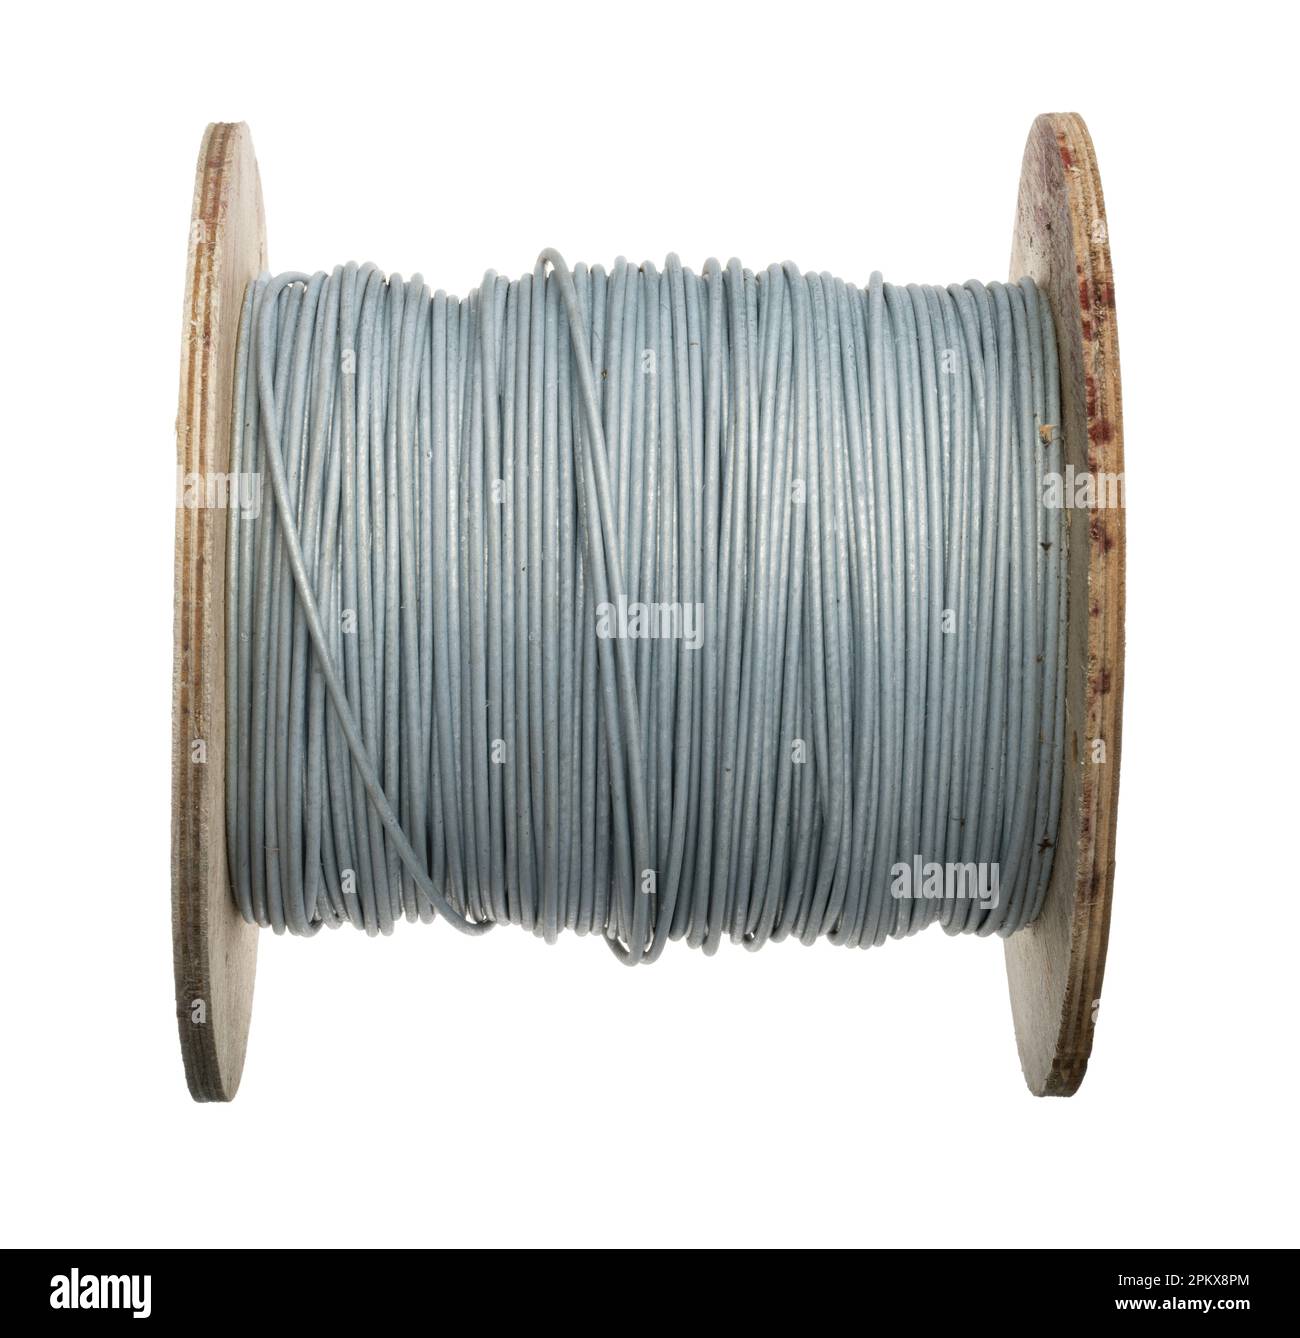 https://c8.alamy.com/comp/2PKX8PM/a-coil-of-fence-wire-thick-gauge-galvanised-metal-wire-stock-fencing-wire-on-a-reel-or-small-drum-2PKX8PM.jpg